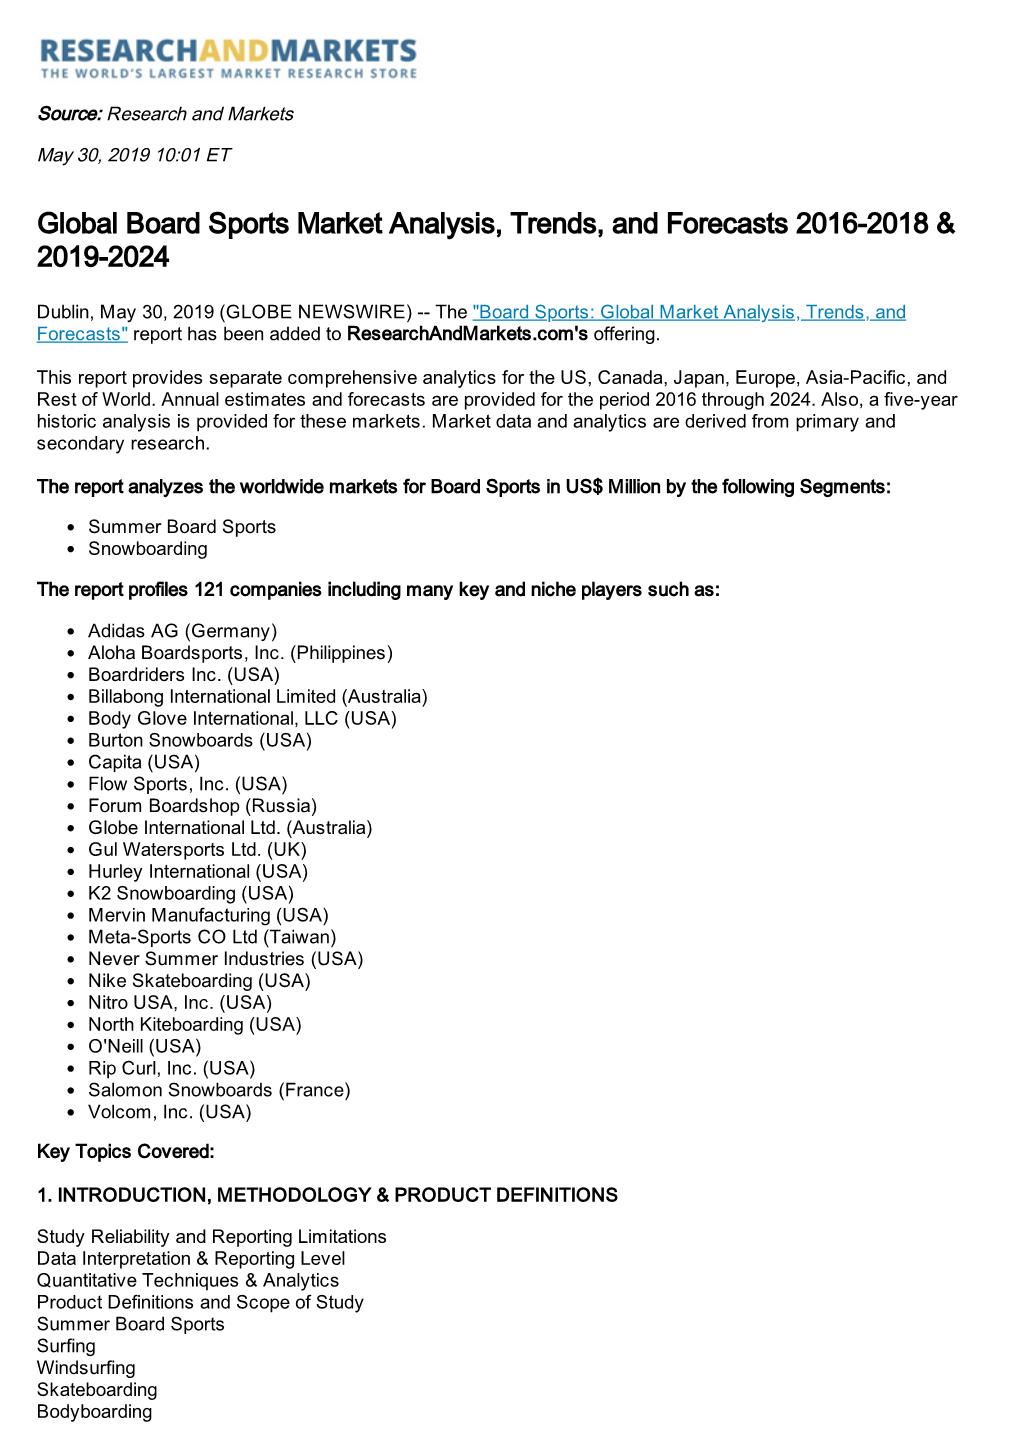 Global Board Sports Market Analysis, Trends, and Forecasts 2016-2018 & 2019-2024